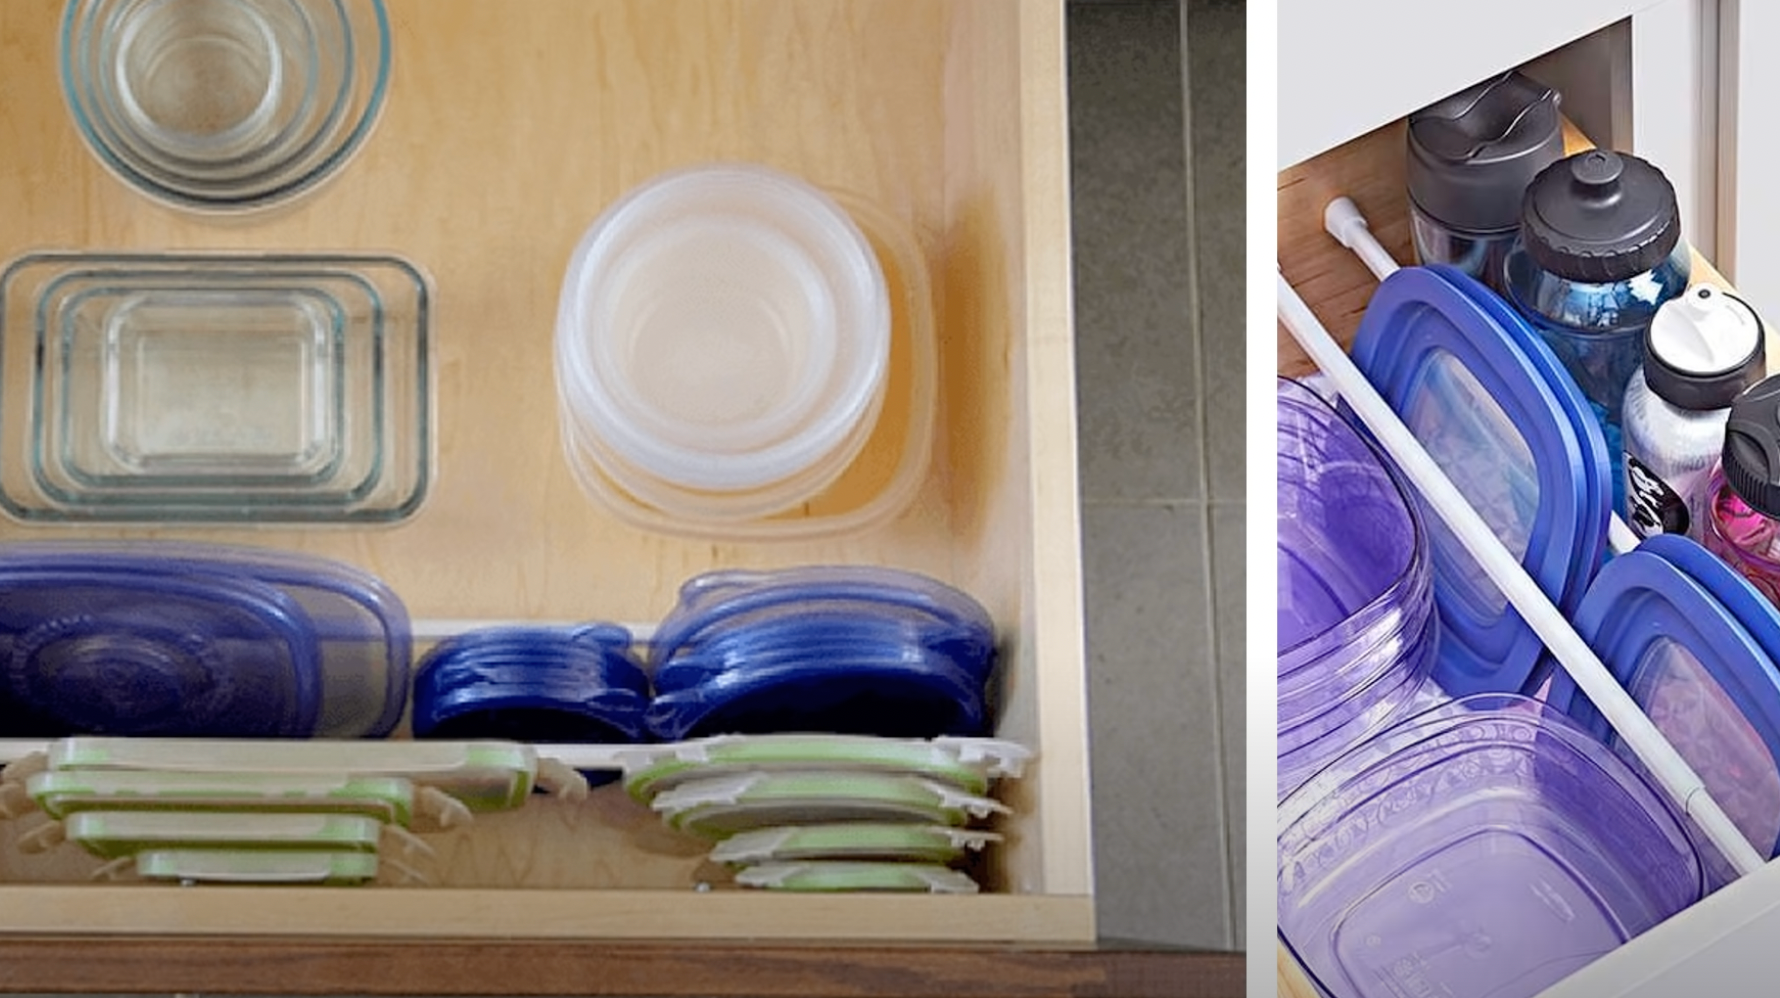 11 Creative Ways to Organise Your Home With Tension Rods